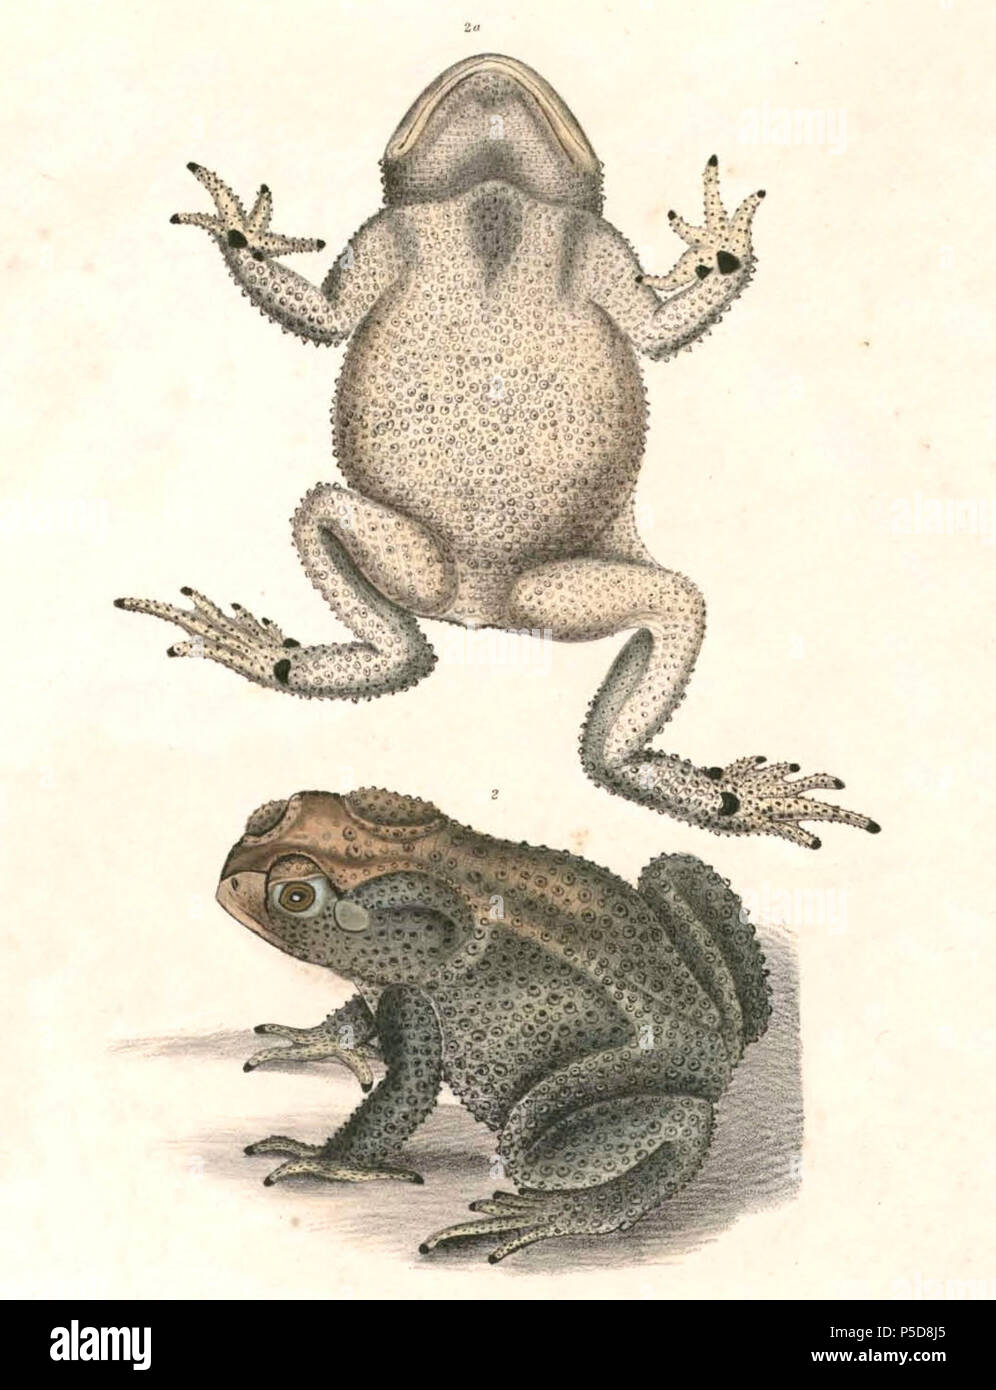 N/A.  English: « Bufo dubia » = Duttaphrynus melanostictus (Asian Common Toad) Français: « Bufo dubia » = Duttaphrynus melanostictus . between 1830 and 1832.   Thomas Hardwicke  (1755–1835)     Alternative names Hardw.  Description English soldier and naturalist  Date of birth/death 1755 3 May 1835  Location of birth/death London Borough of Lambeth  Authority control  : Q2543258 VIAF:308180676 LCCN:nb2013018703 Botanist:Hardw. SUDOC:183009134 WorldCat 487 Duttaphrynus melanostictus 2 Hardwicke Stock Photo